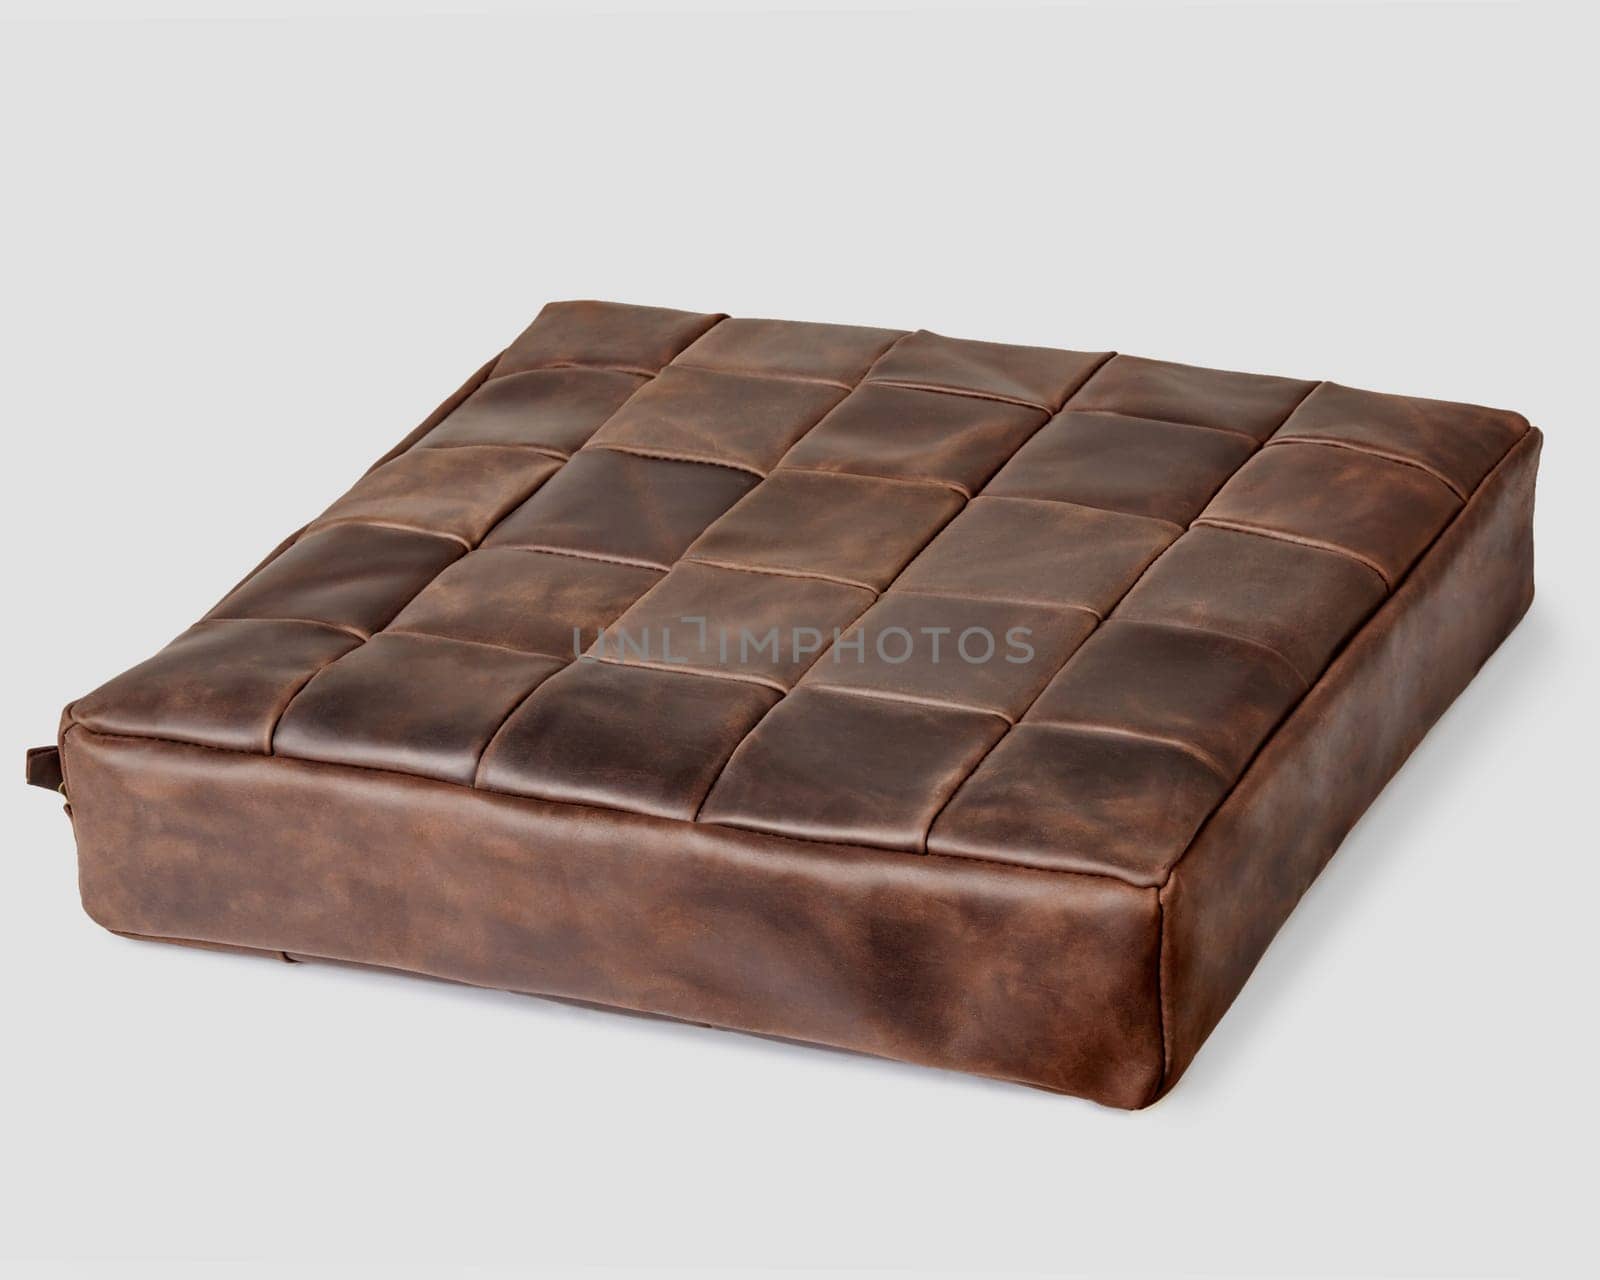 Decorative soft seat cushion made of brown leather patches by nazarovsergey